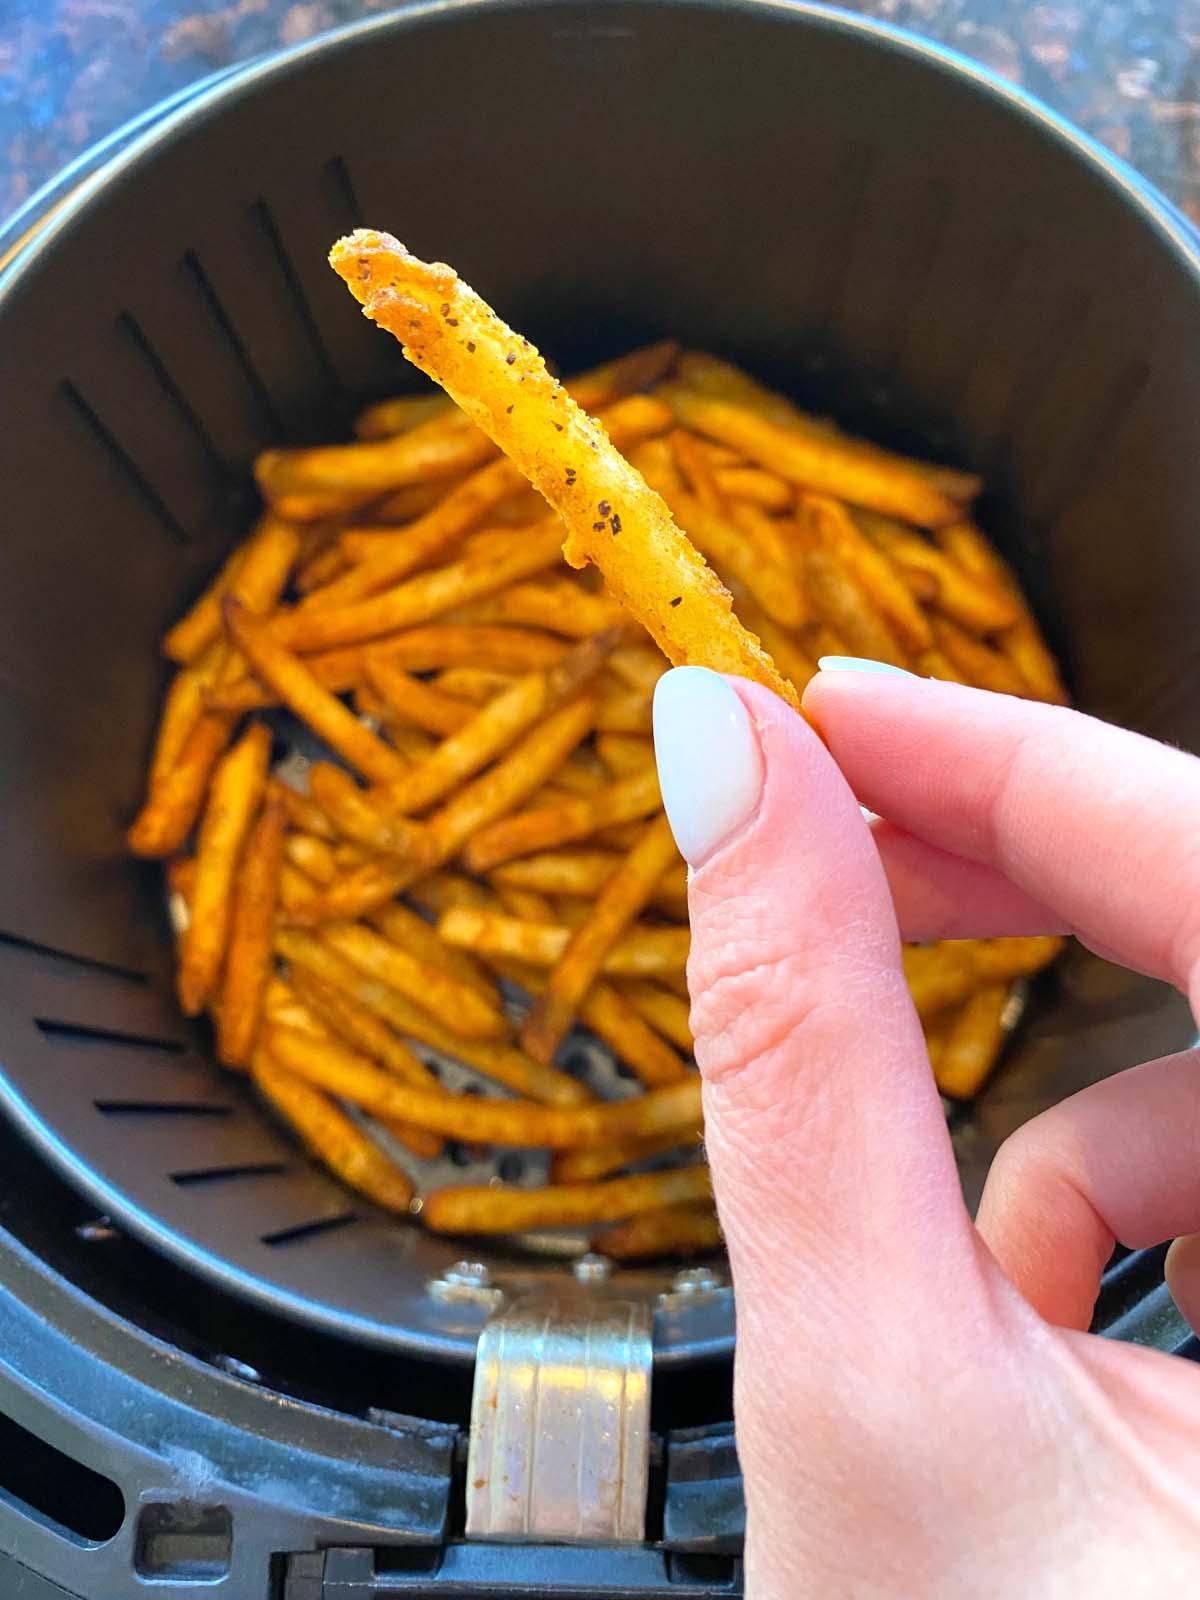 Cooked french fries in an air fryer.